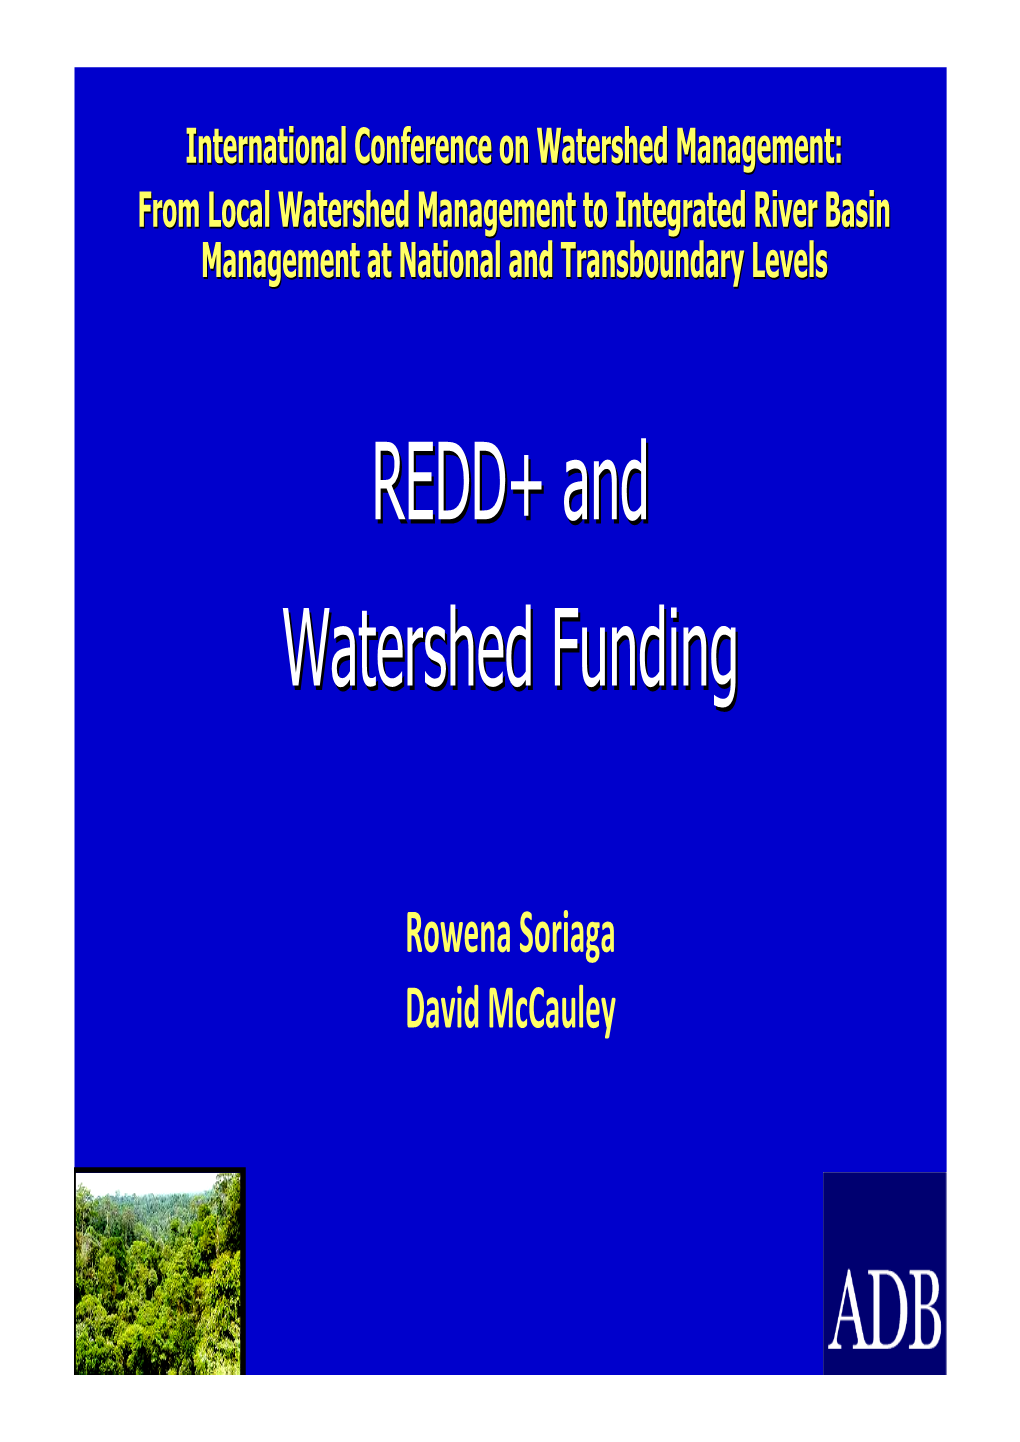 REDD+ and Watershed Funding